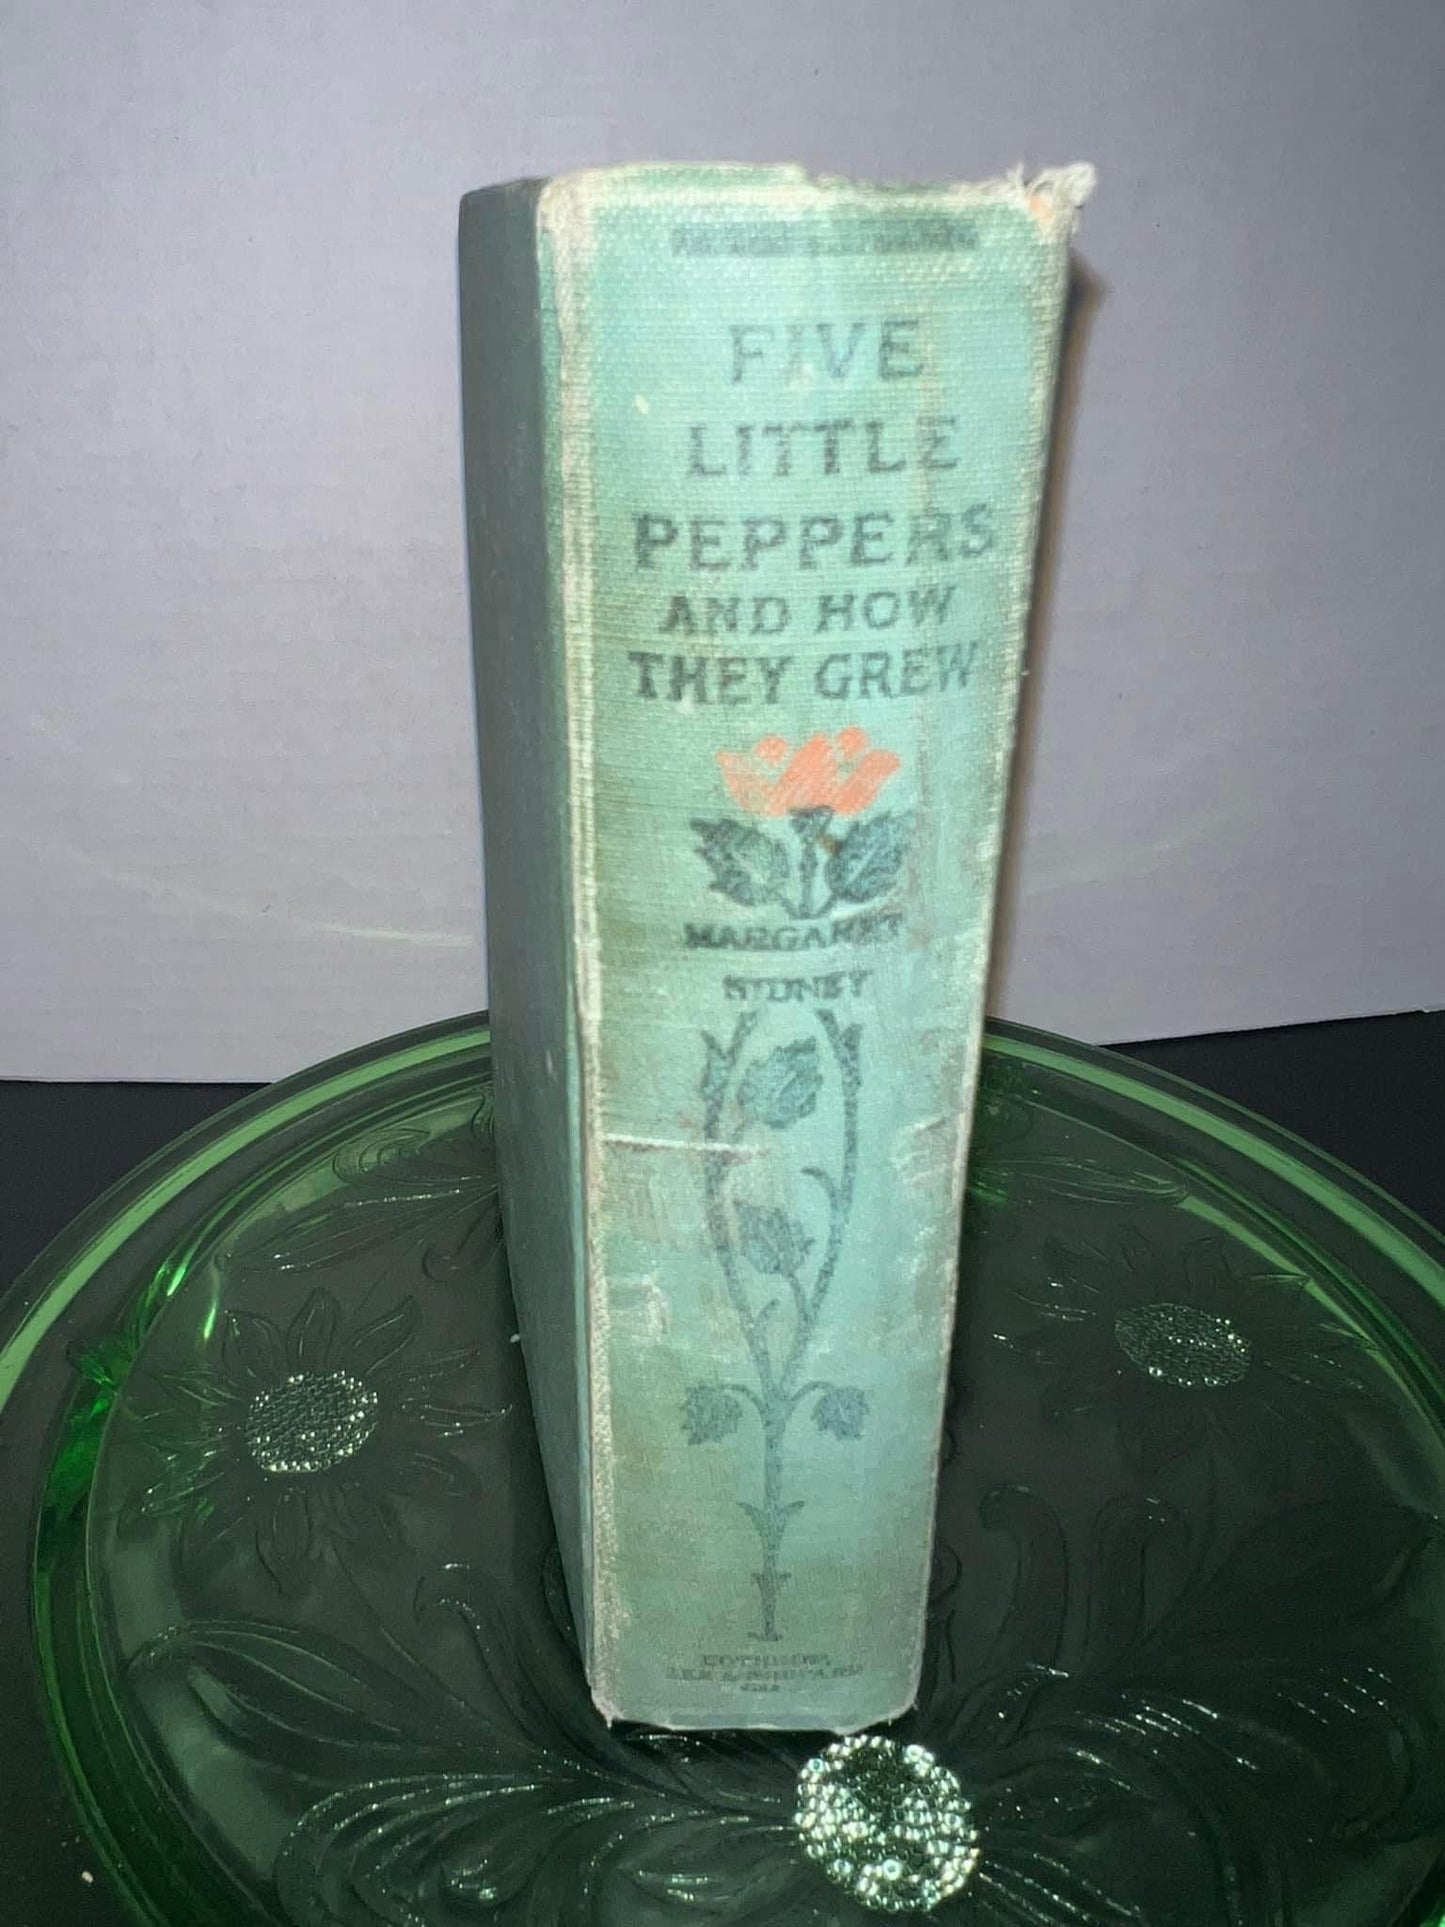 Antique 1909 Five little peppers and how they grew